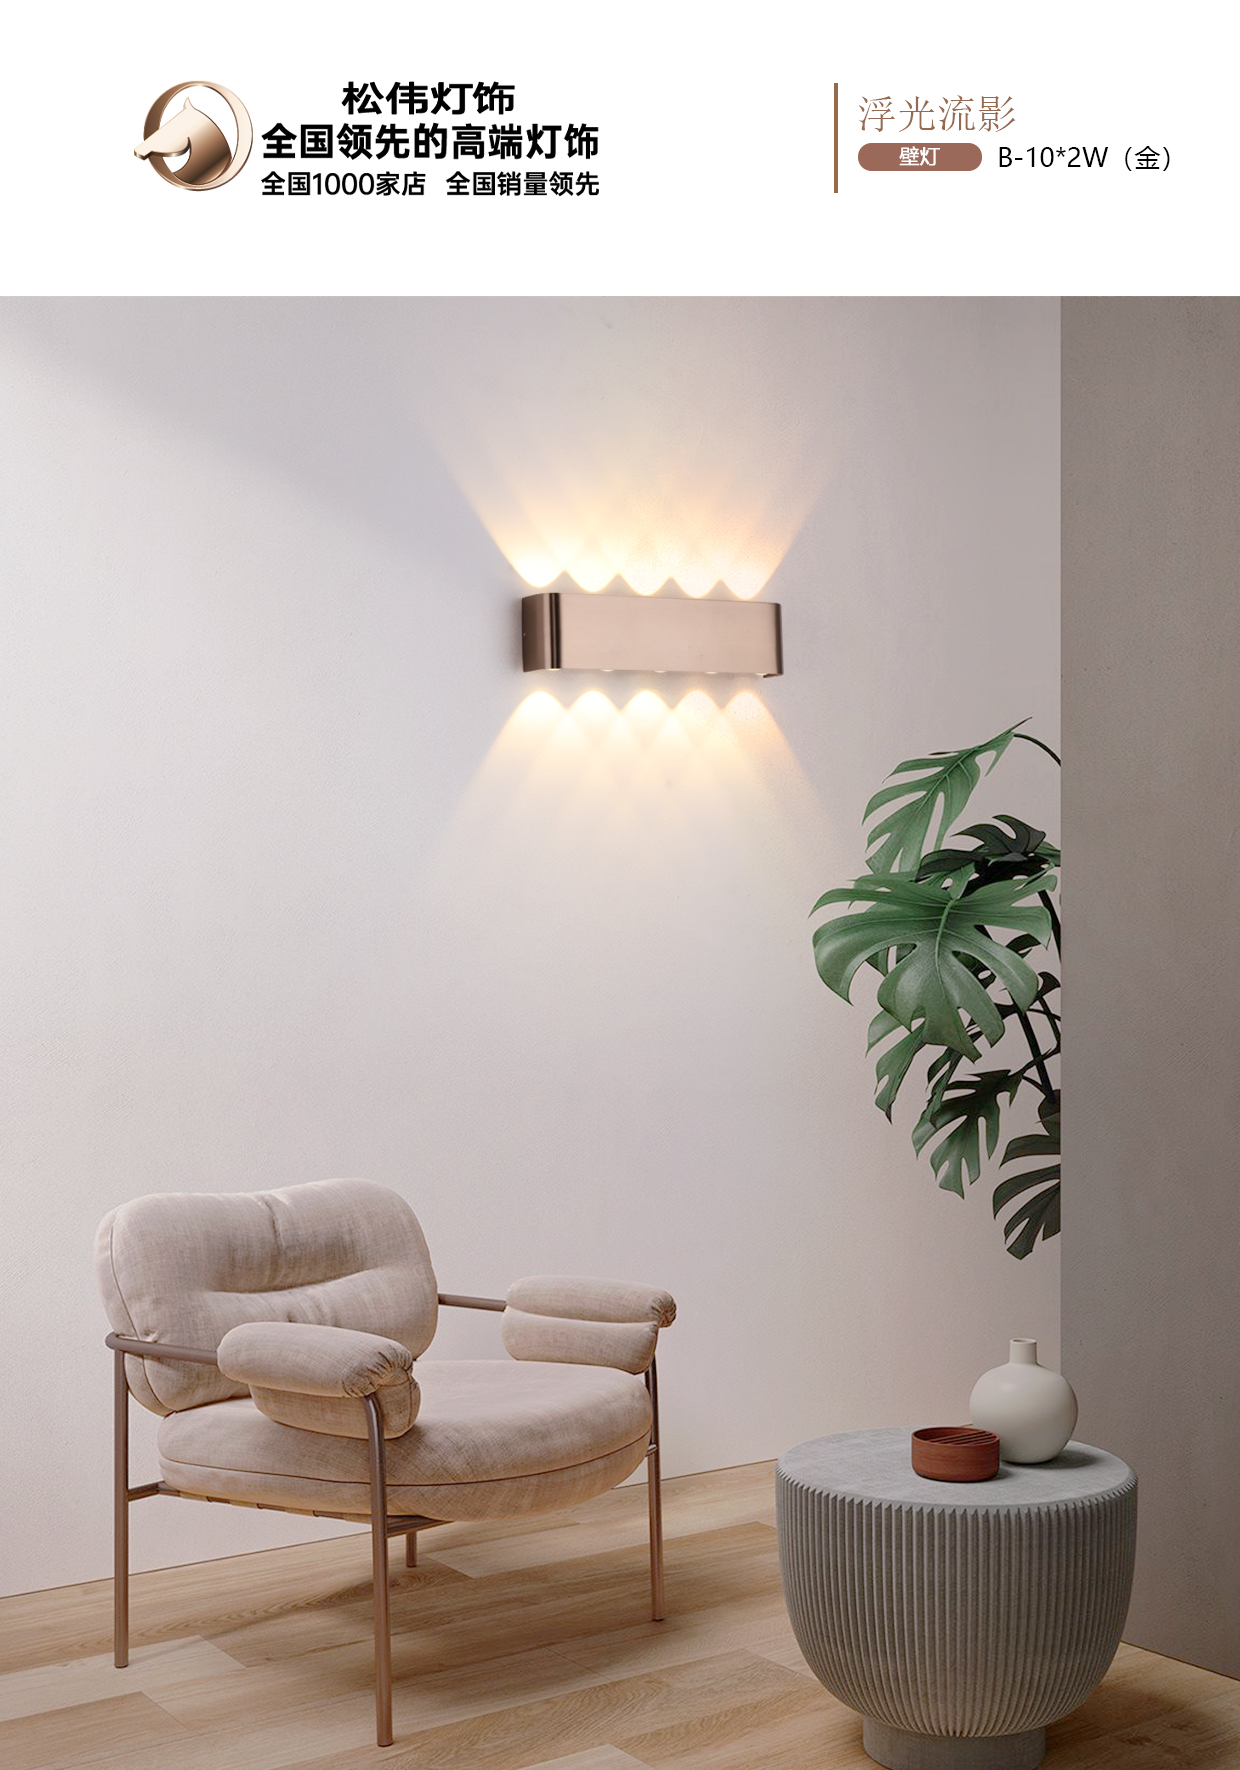 Floating light flowing shadow series wall lamp